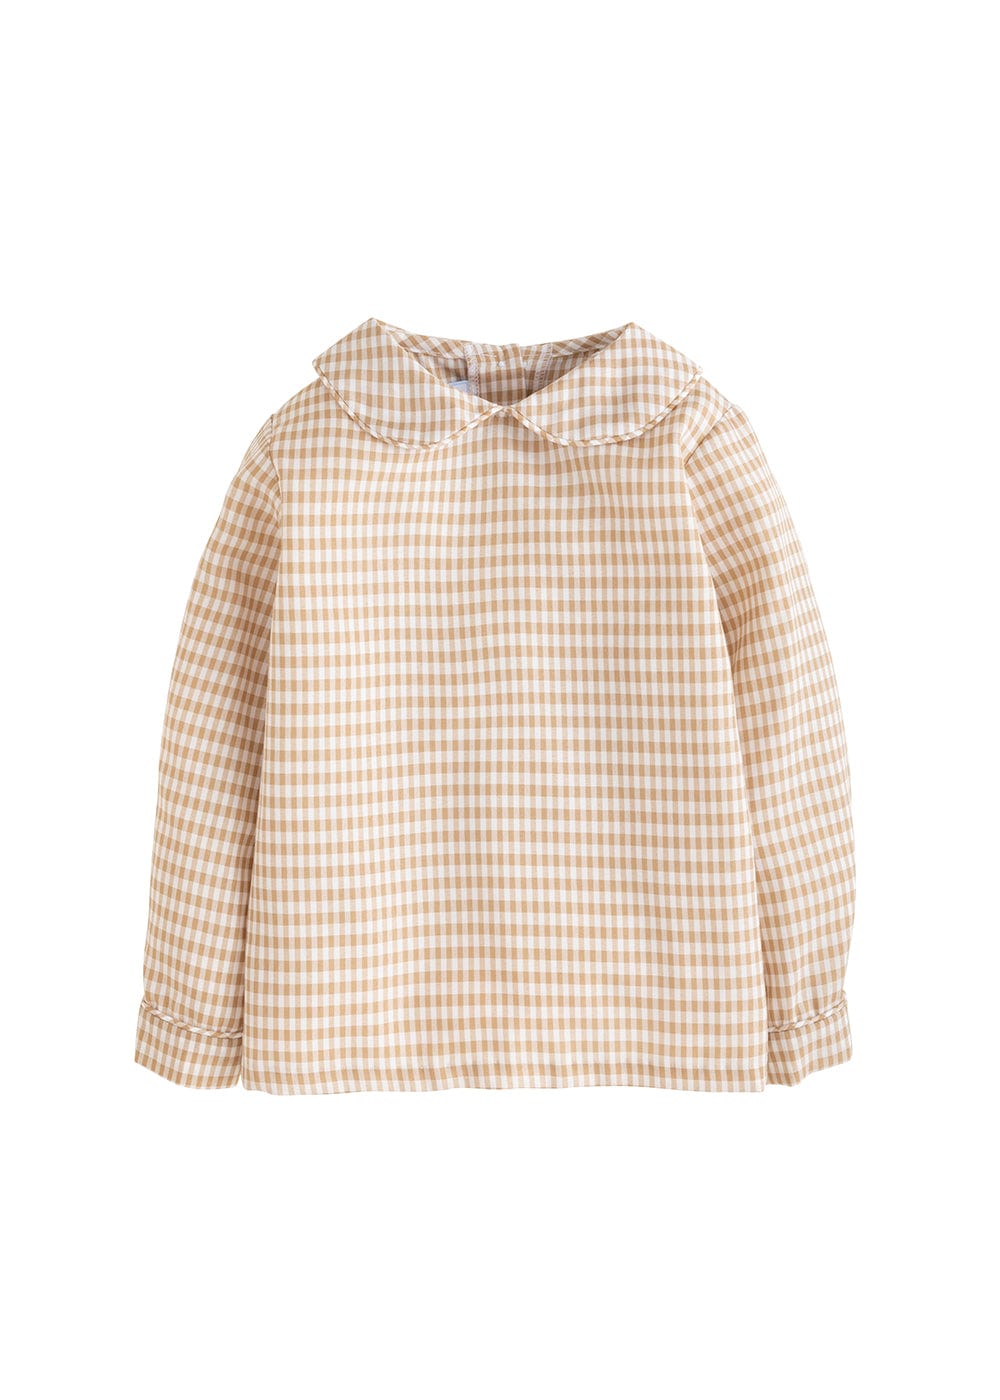 classic childrens clothing boys shirt in beige gingham pattern with petter pan collar